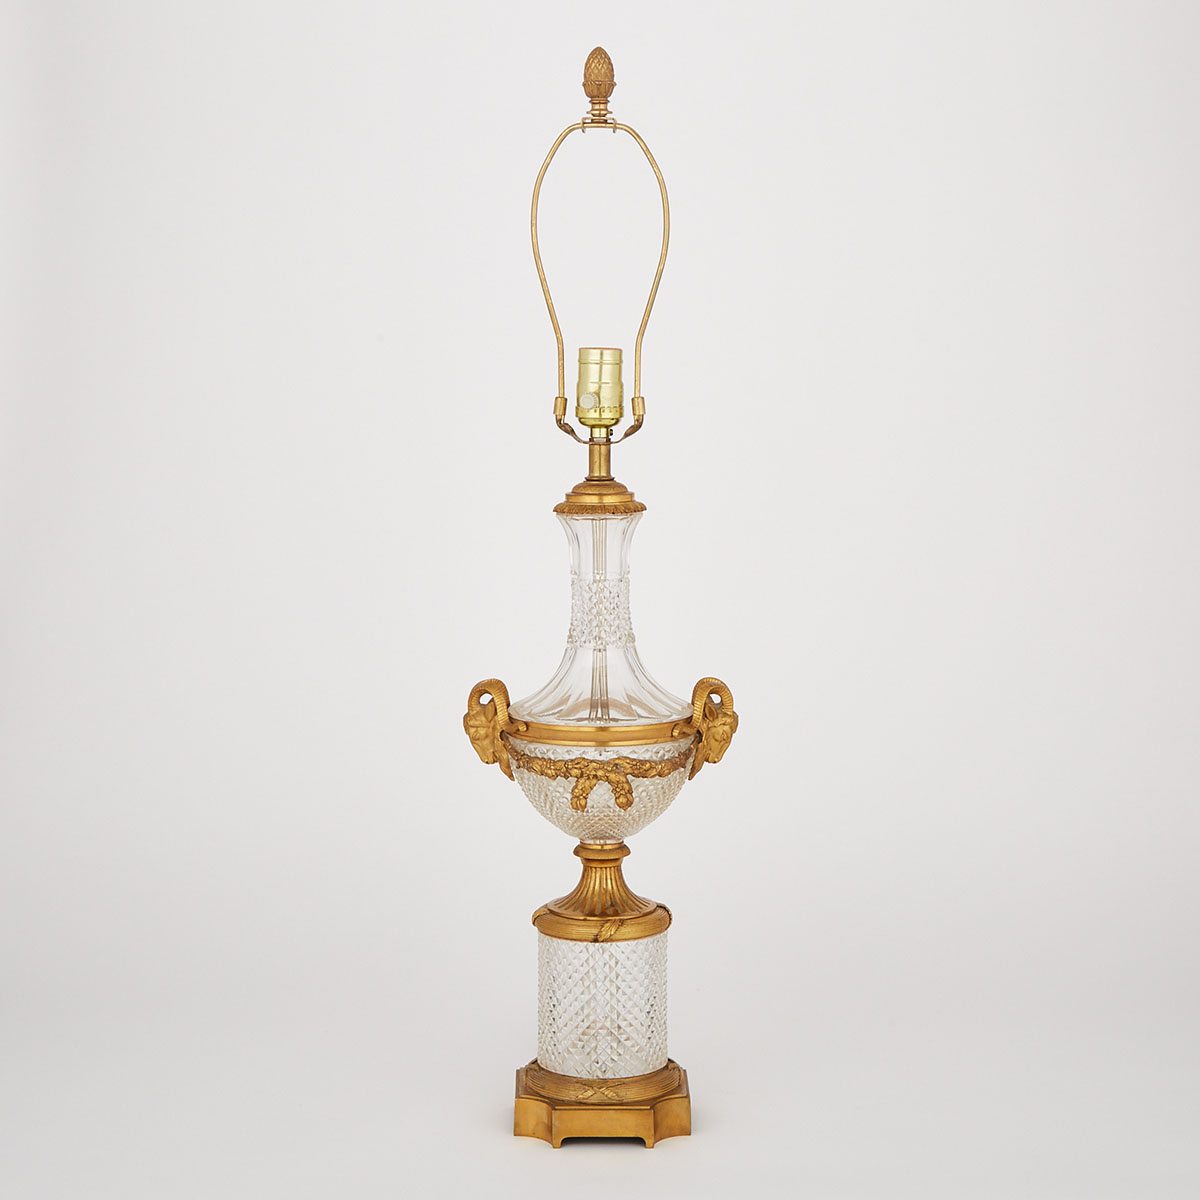 Austrian Gilt Bronze and Cut Glass Urn Form Table Lamp, mid 20th century